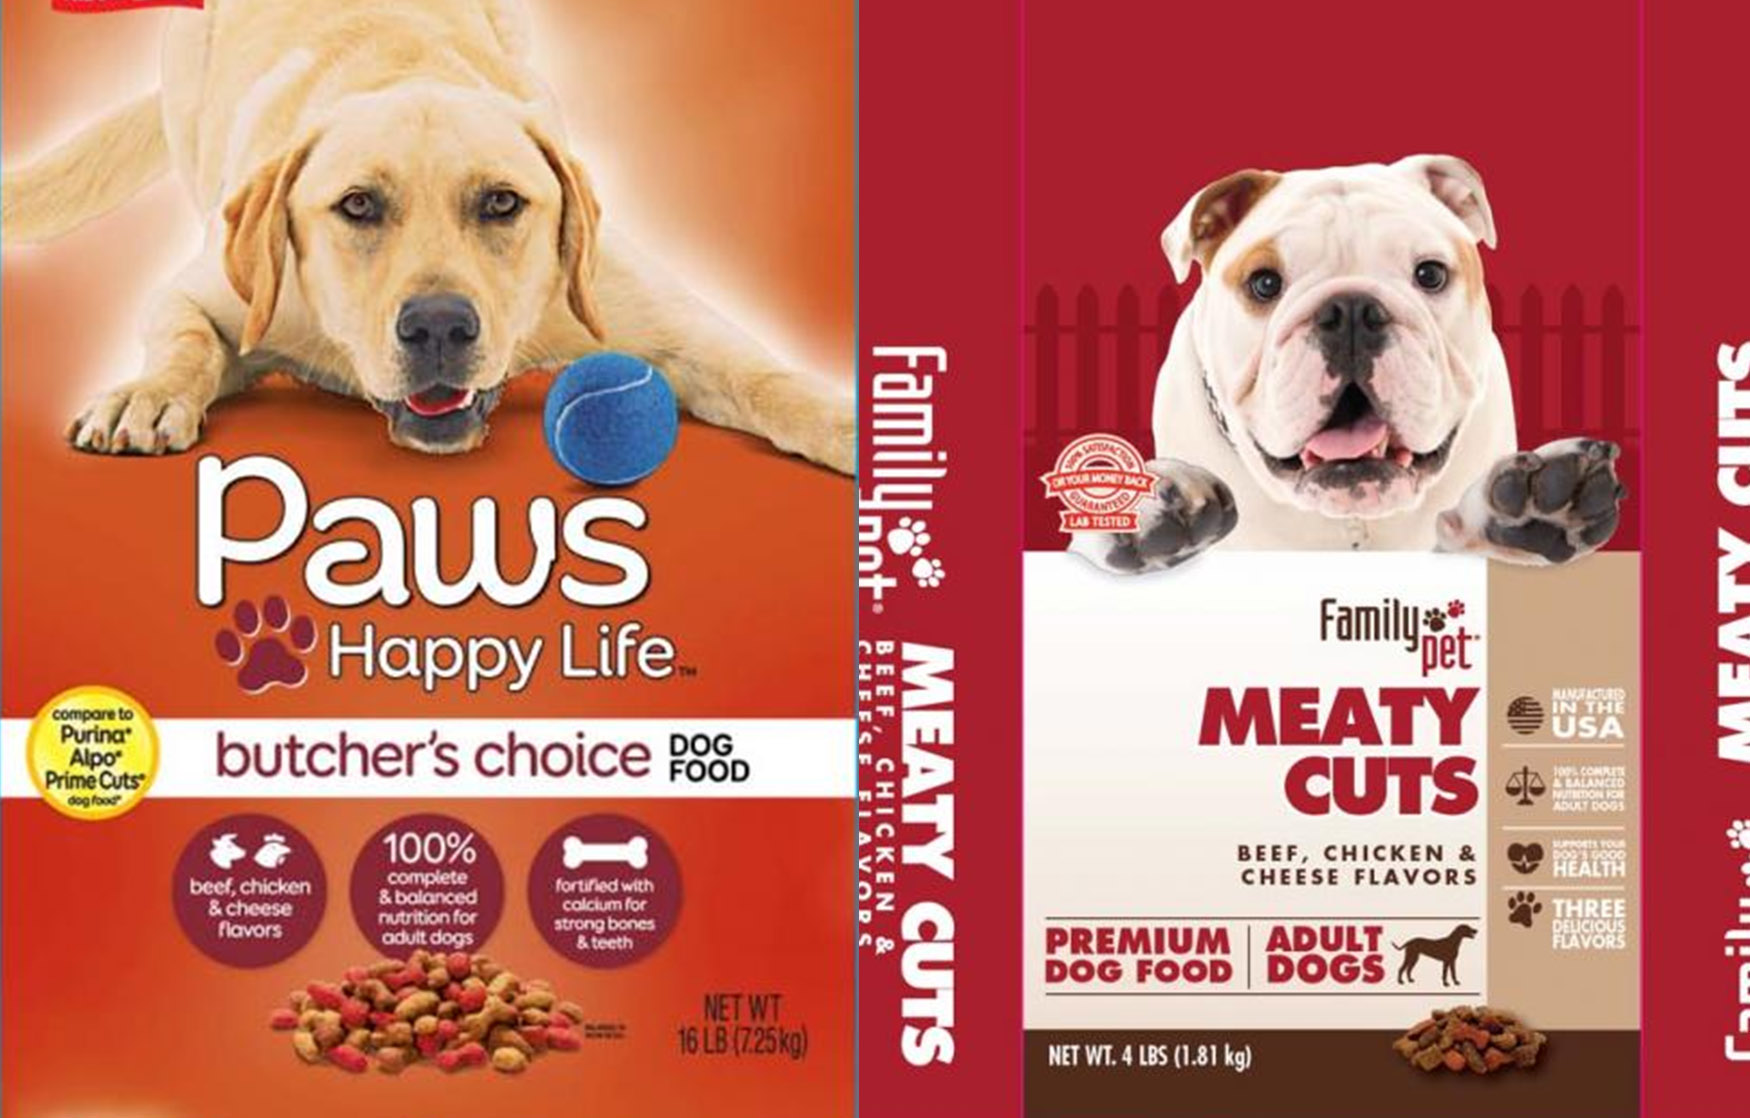 Pet food maker recalled 17 different pet food brands – here’s the full